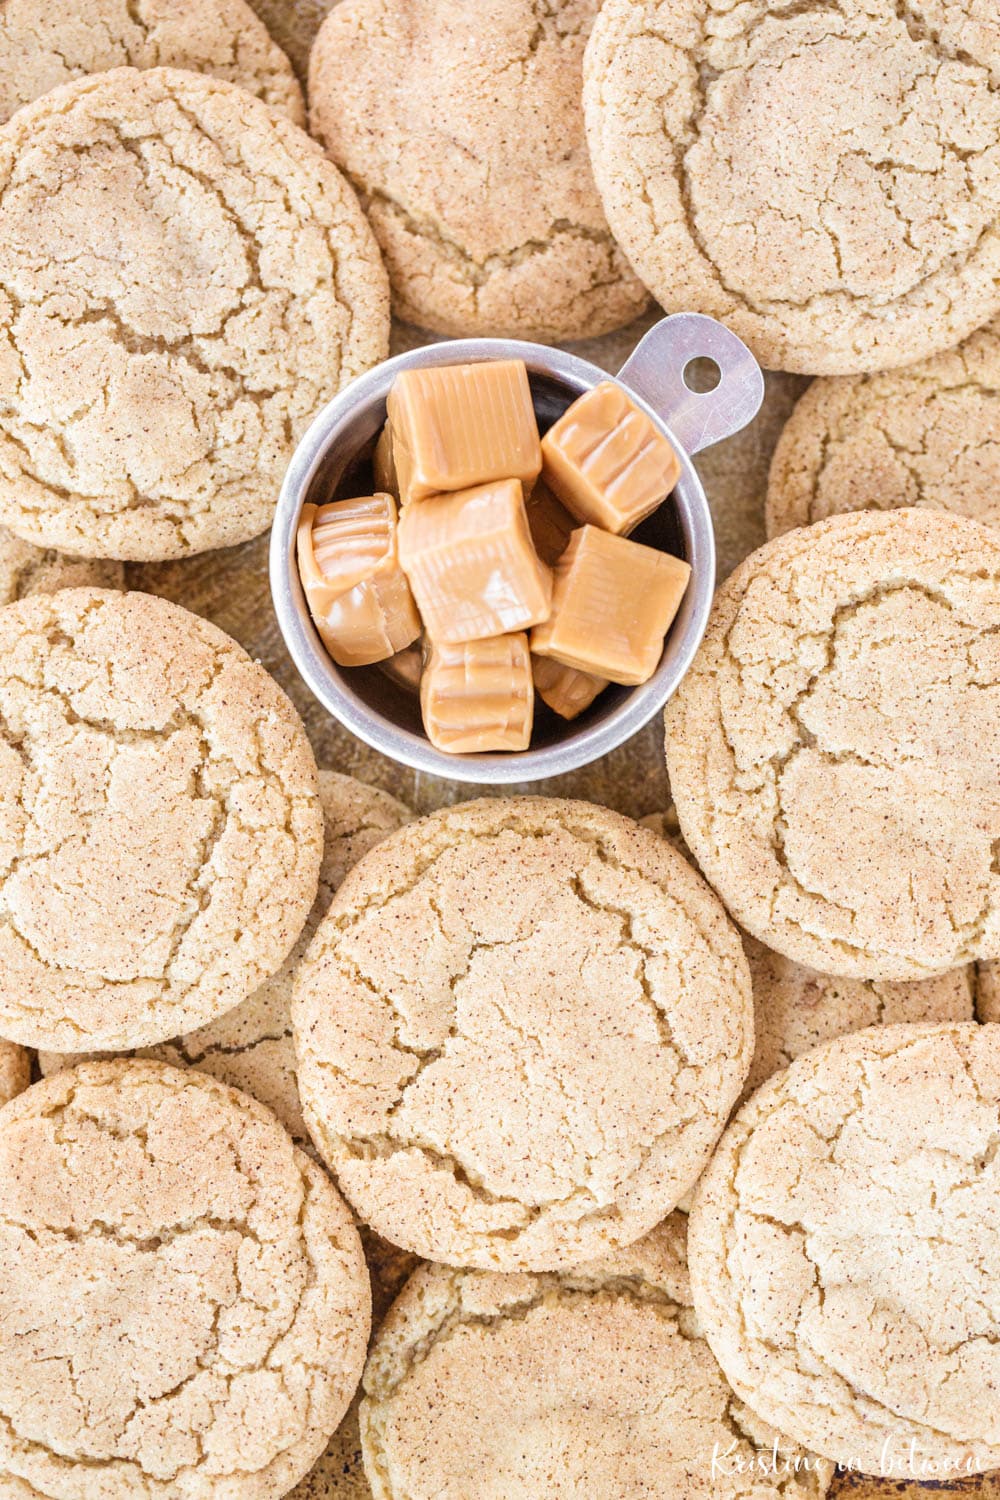 A pile of cookies with a cup of caramel candies in the center.